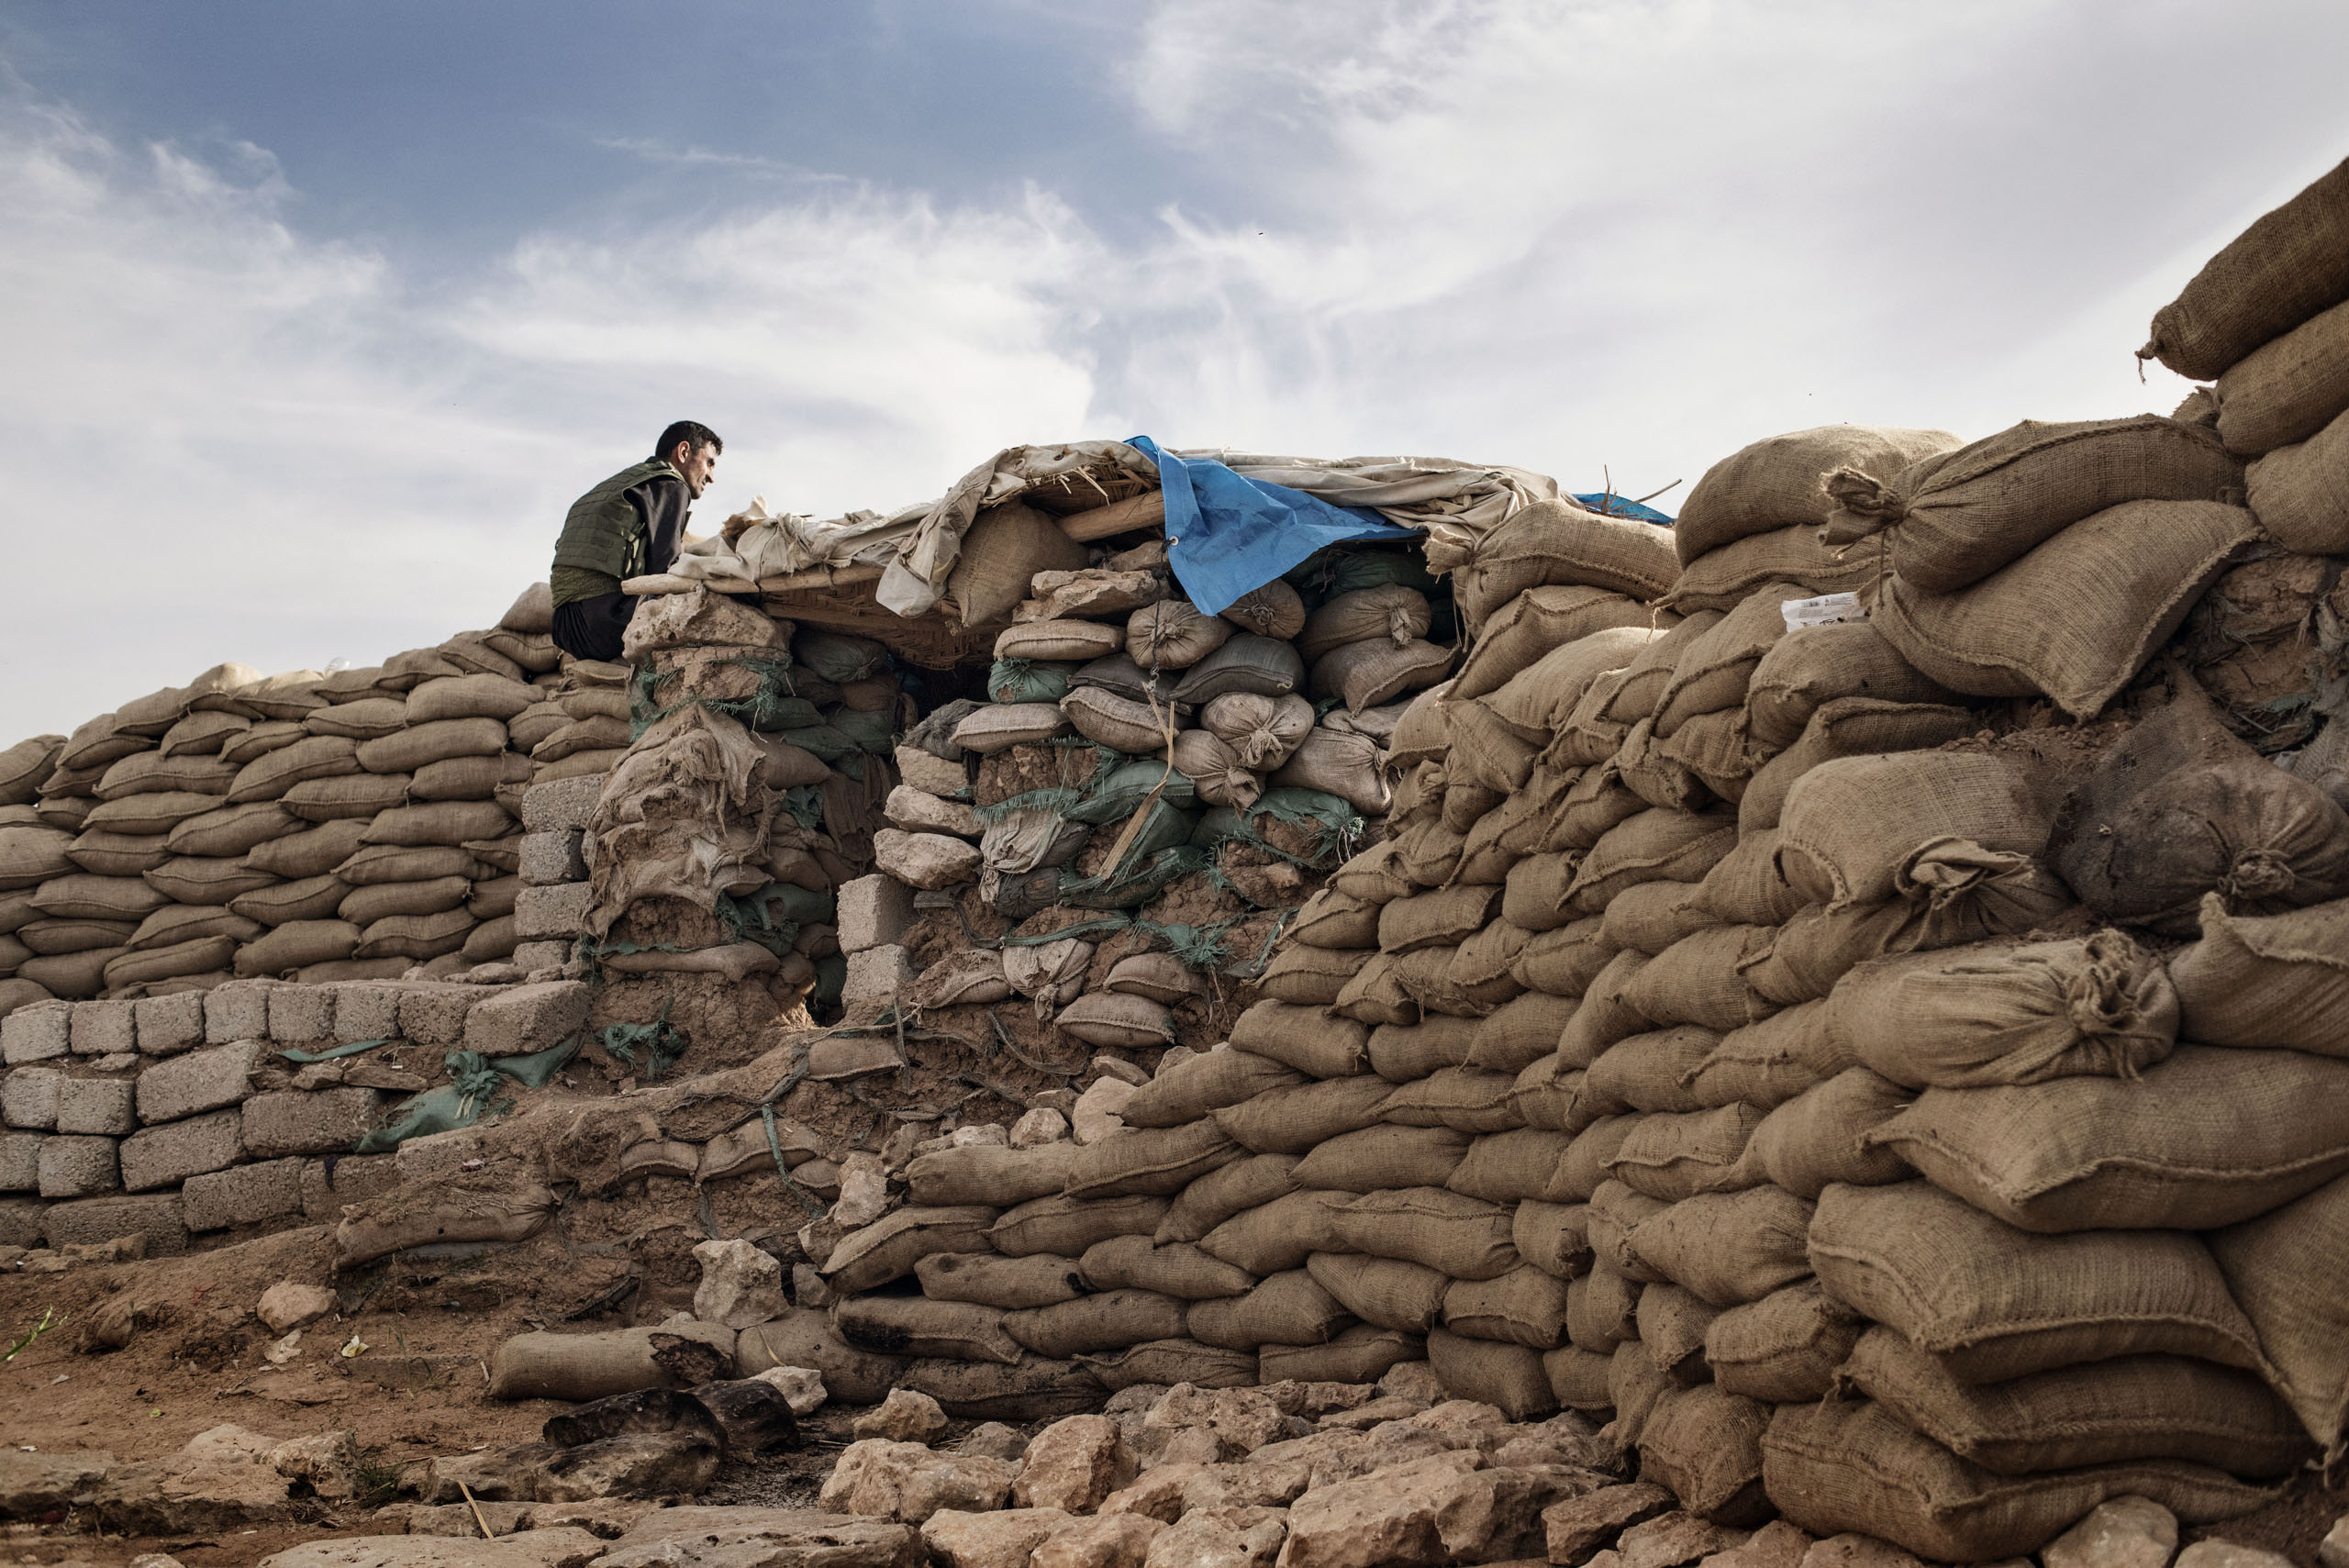 A member of the Kurdish Peshmerga armed forces sits atop sandbags, overlooking the ISIS-held city of Mosul, northern Iraq, May 9, 2016. The Kurdish fighters holding the line against ISIS are so close to ISIS positions that they can even pick up the jihadists' radio broadcasts, including propaganda and religious programing. Days earlier, the Kurdish fighters at the Bashiqa front repelled an attack that left at least two dead among their ranks.